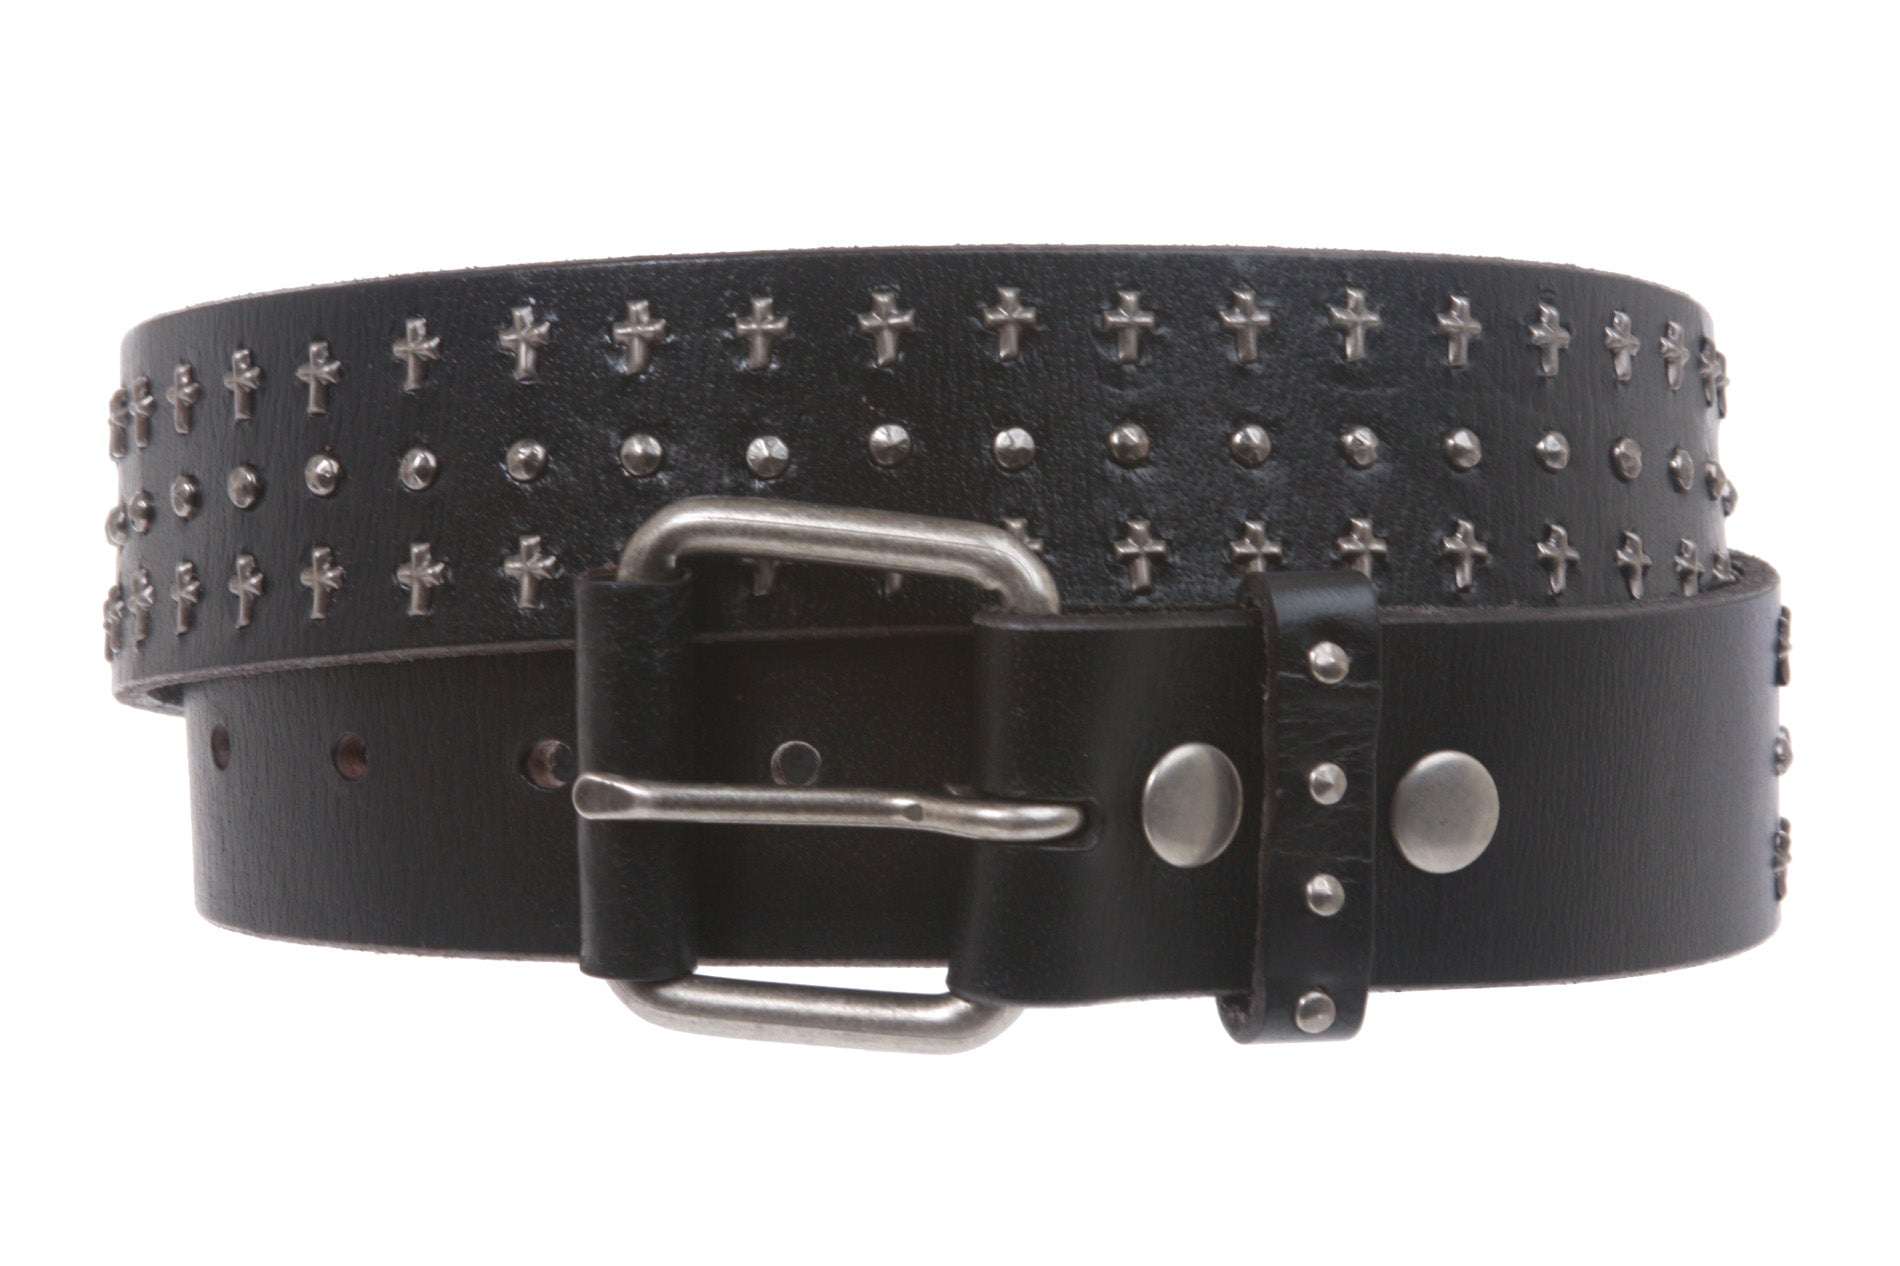 1 1/2" Snap On Riveted Chritian Religious Cross and Circle Studded Leather Belt